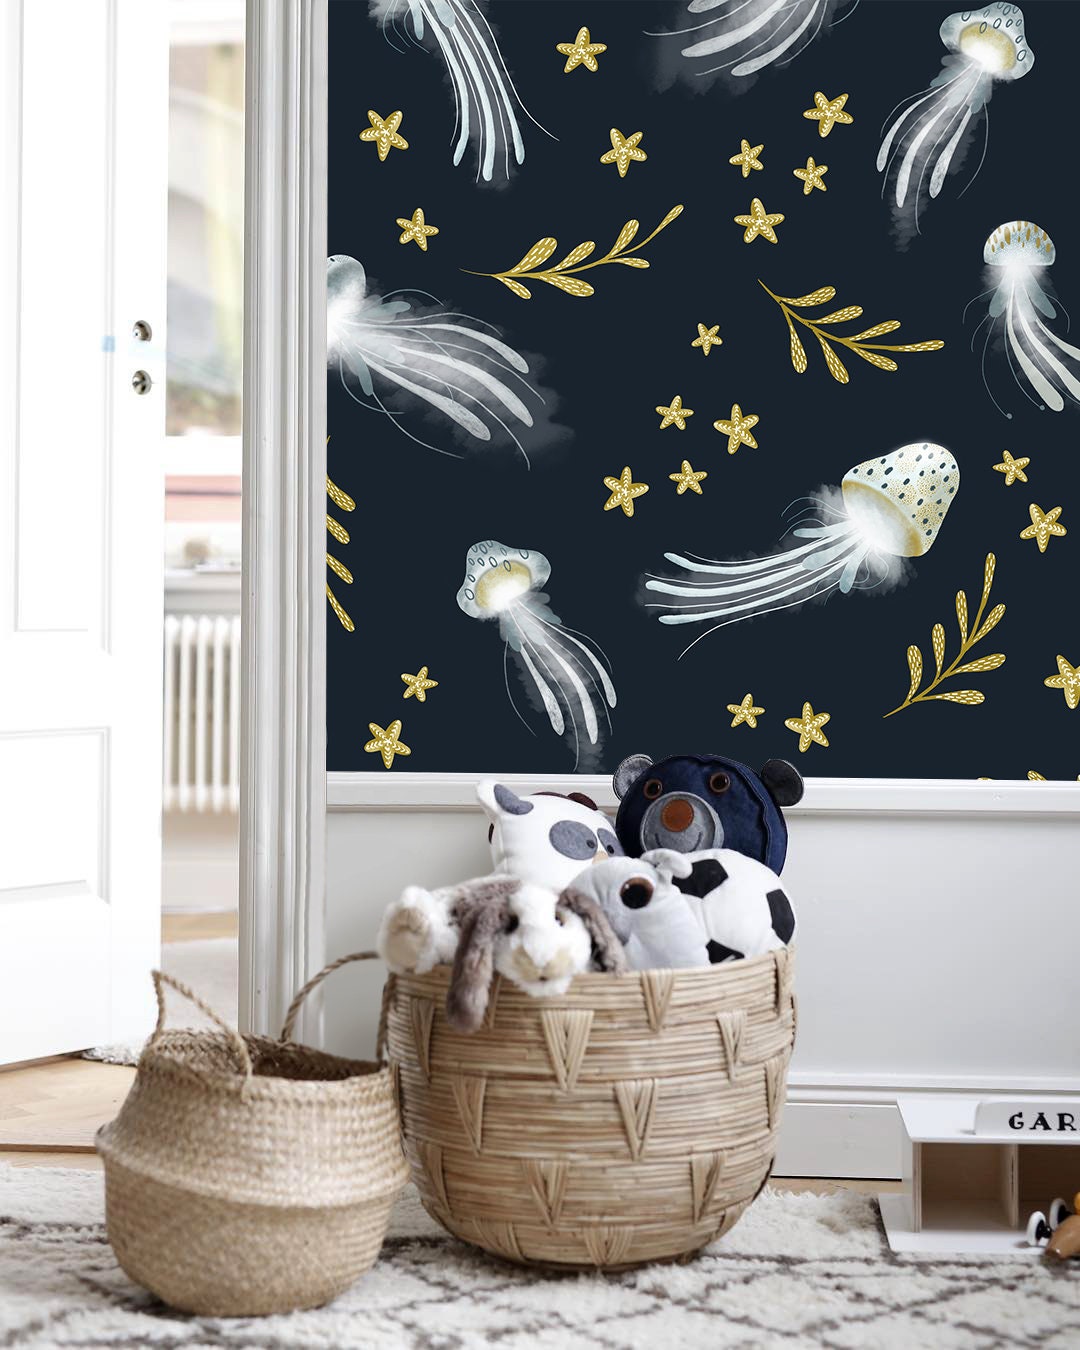 Removable Wallpaper Peel and Stick Wallpaper Wall Paper Wall / Jellyfish Navy Nursery Room Wallpaper - X120